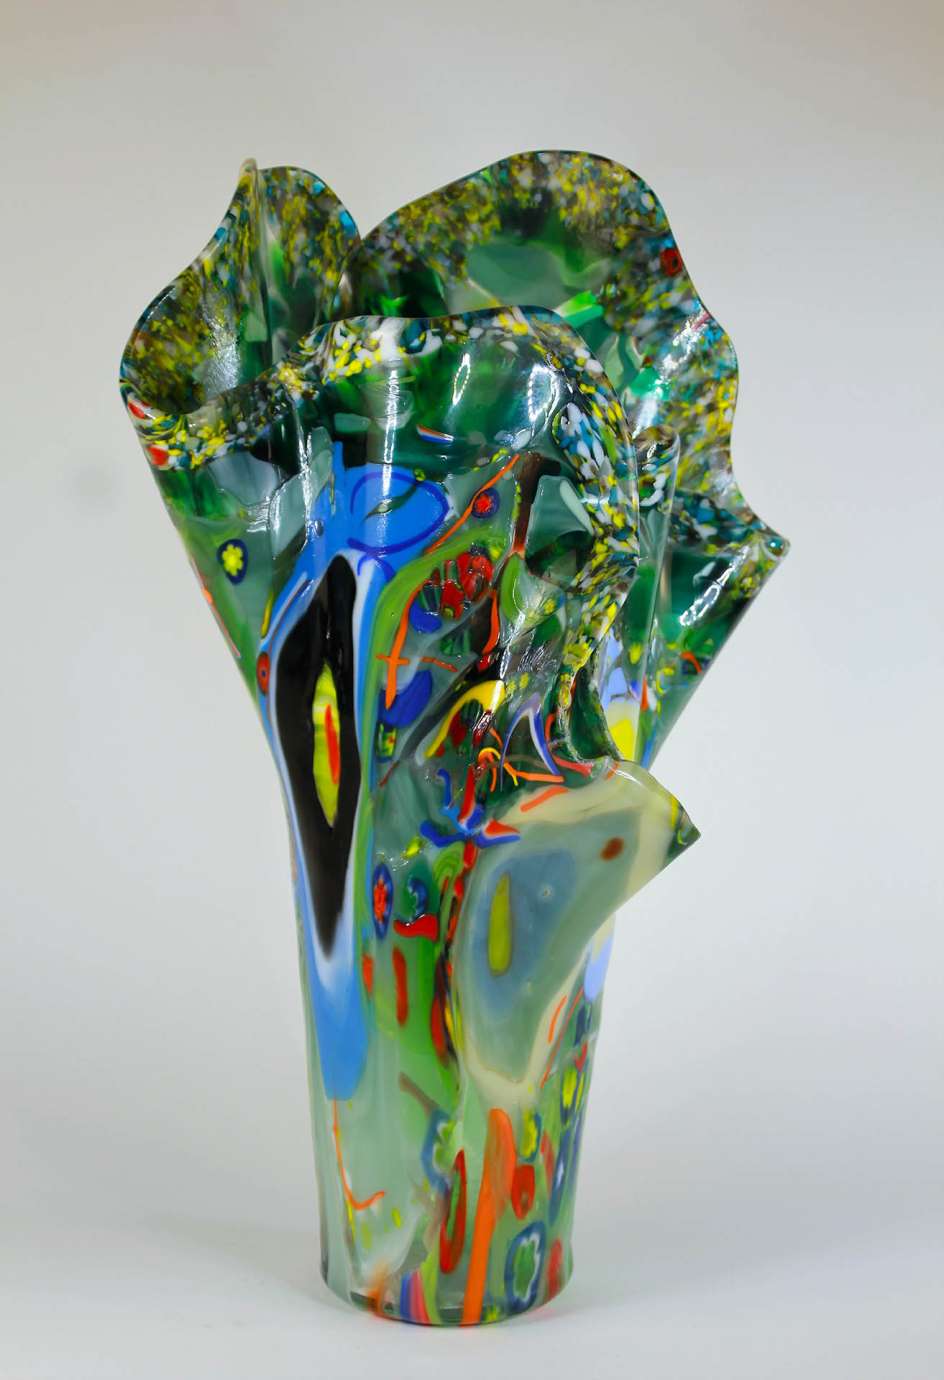 a multi colored blue, green, yellow, and red glass vase with many folds